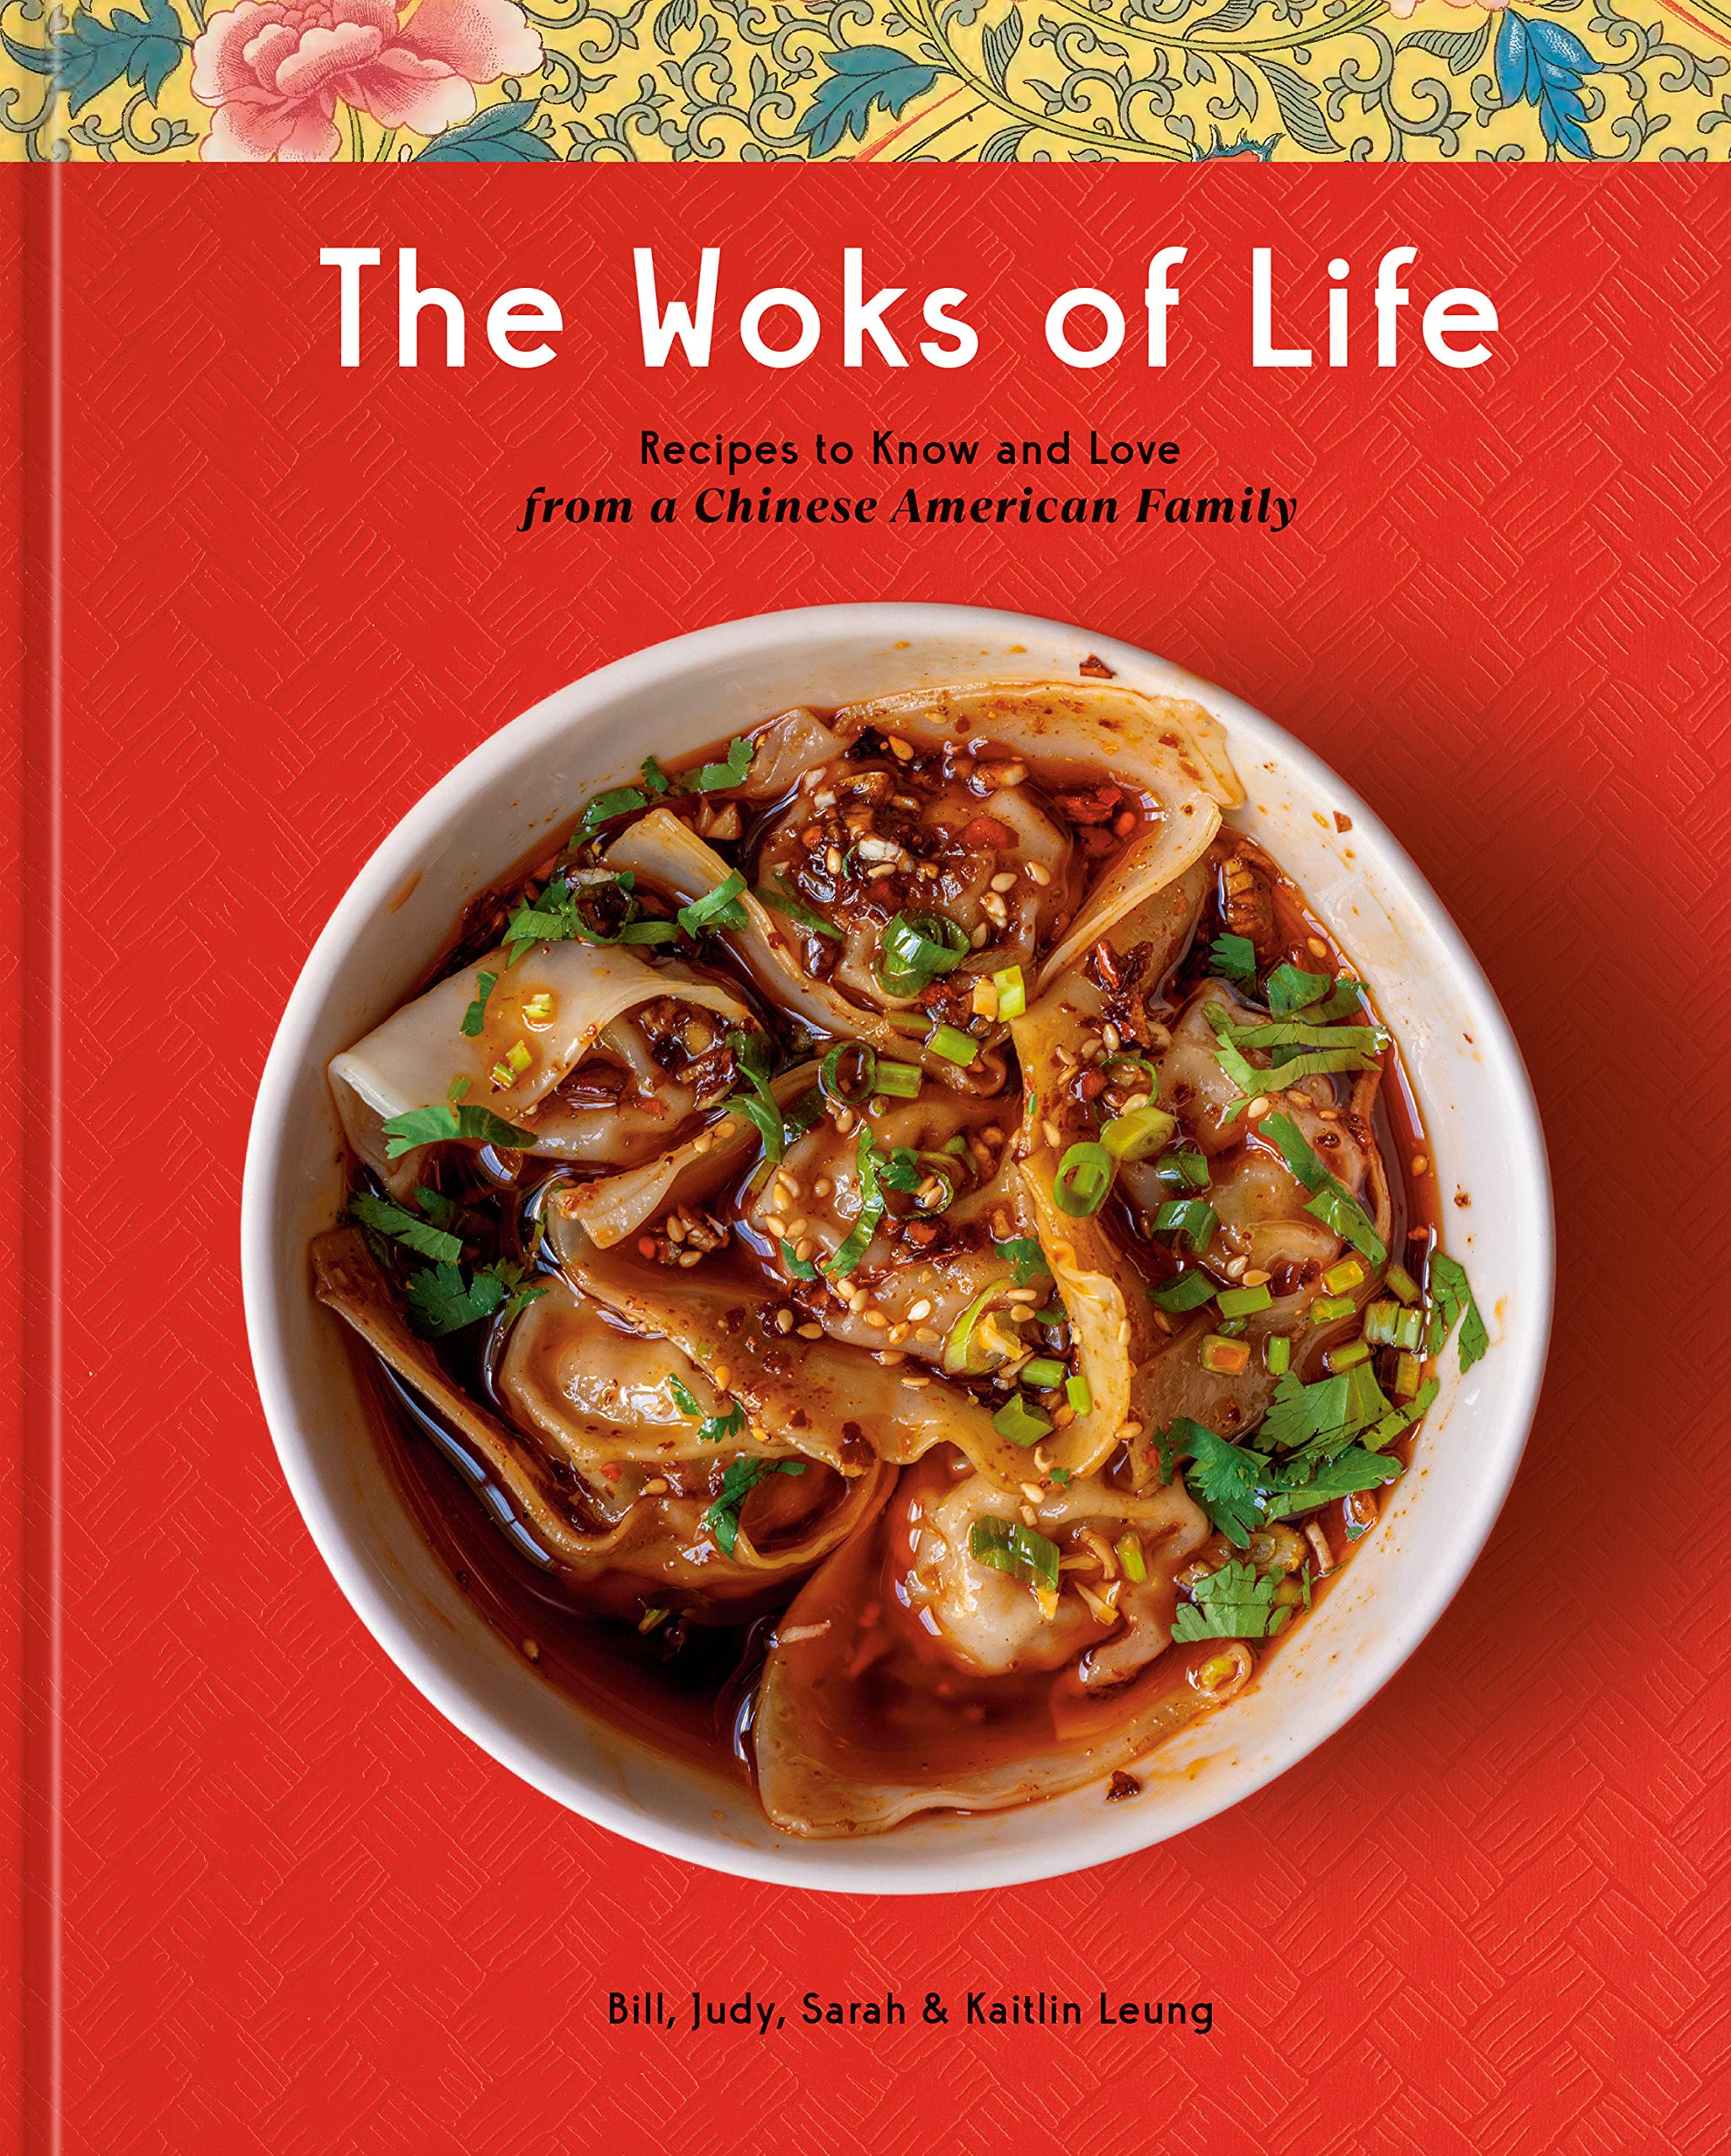 The Woks of Life: Recipes to Know and Love from a Chinese American Family: A Cookbook (Hardcover)